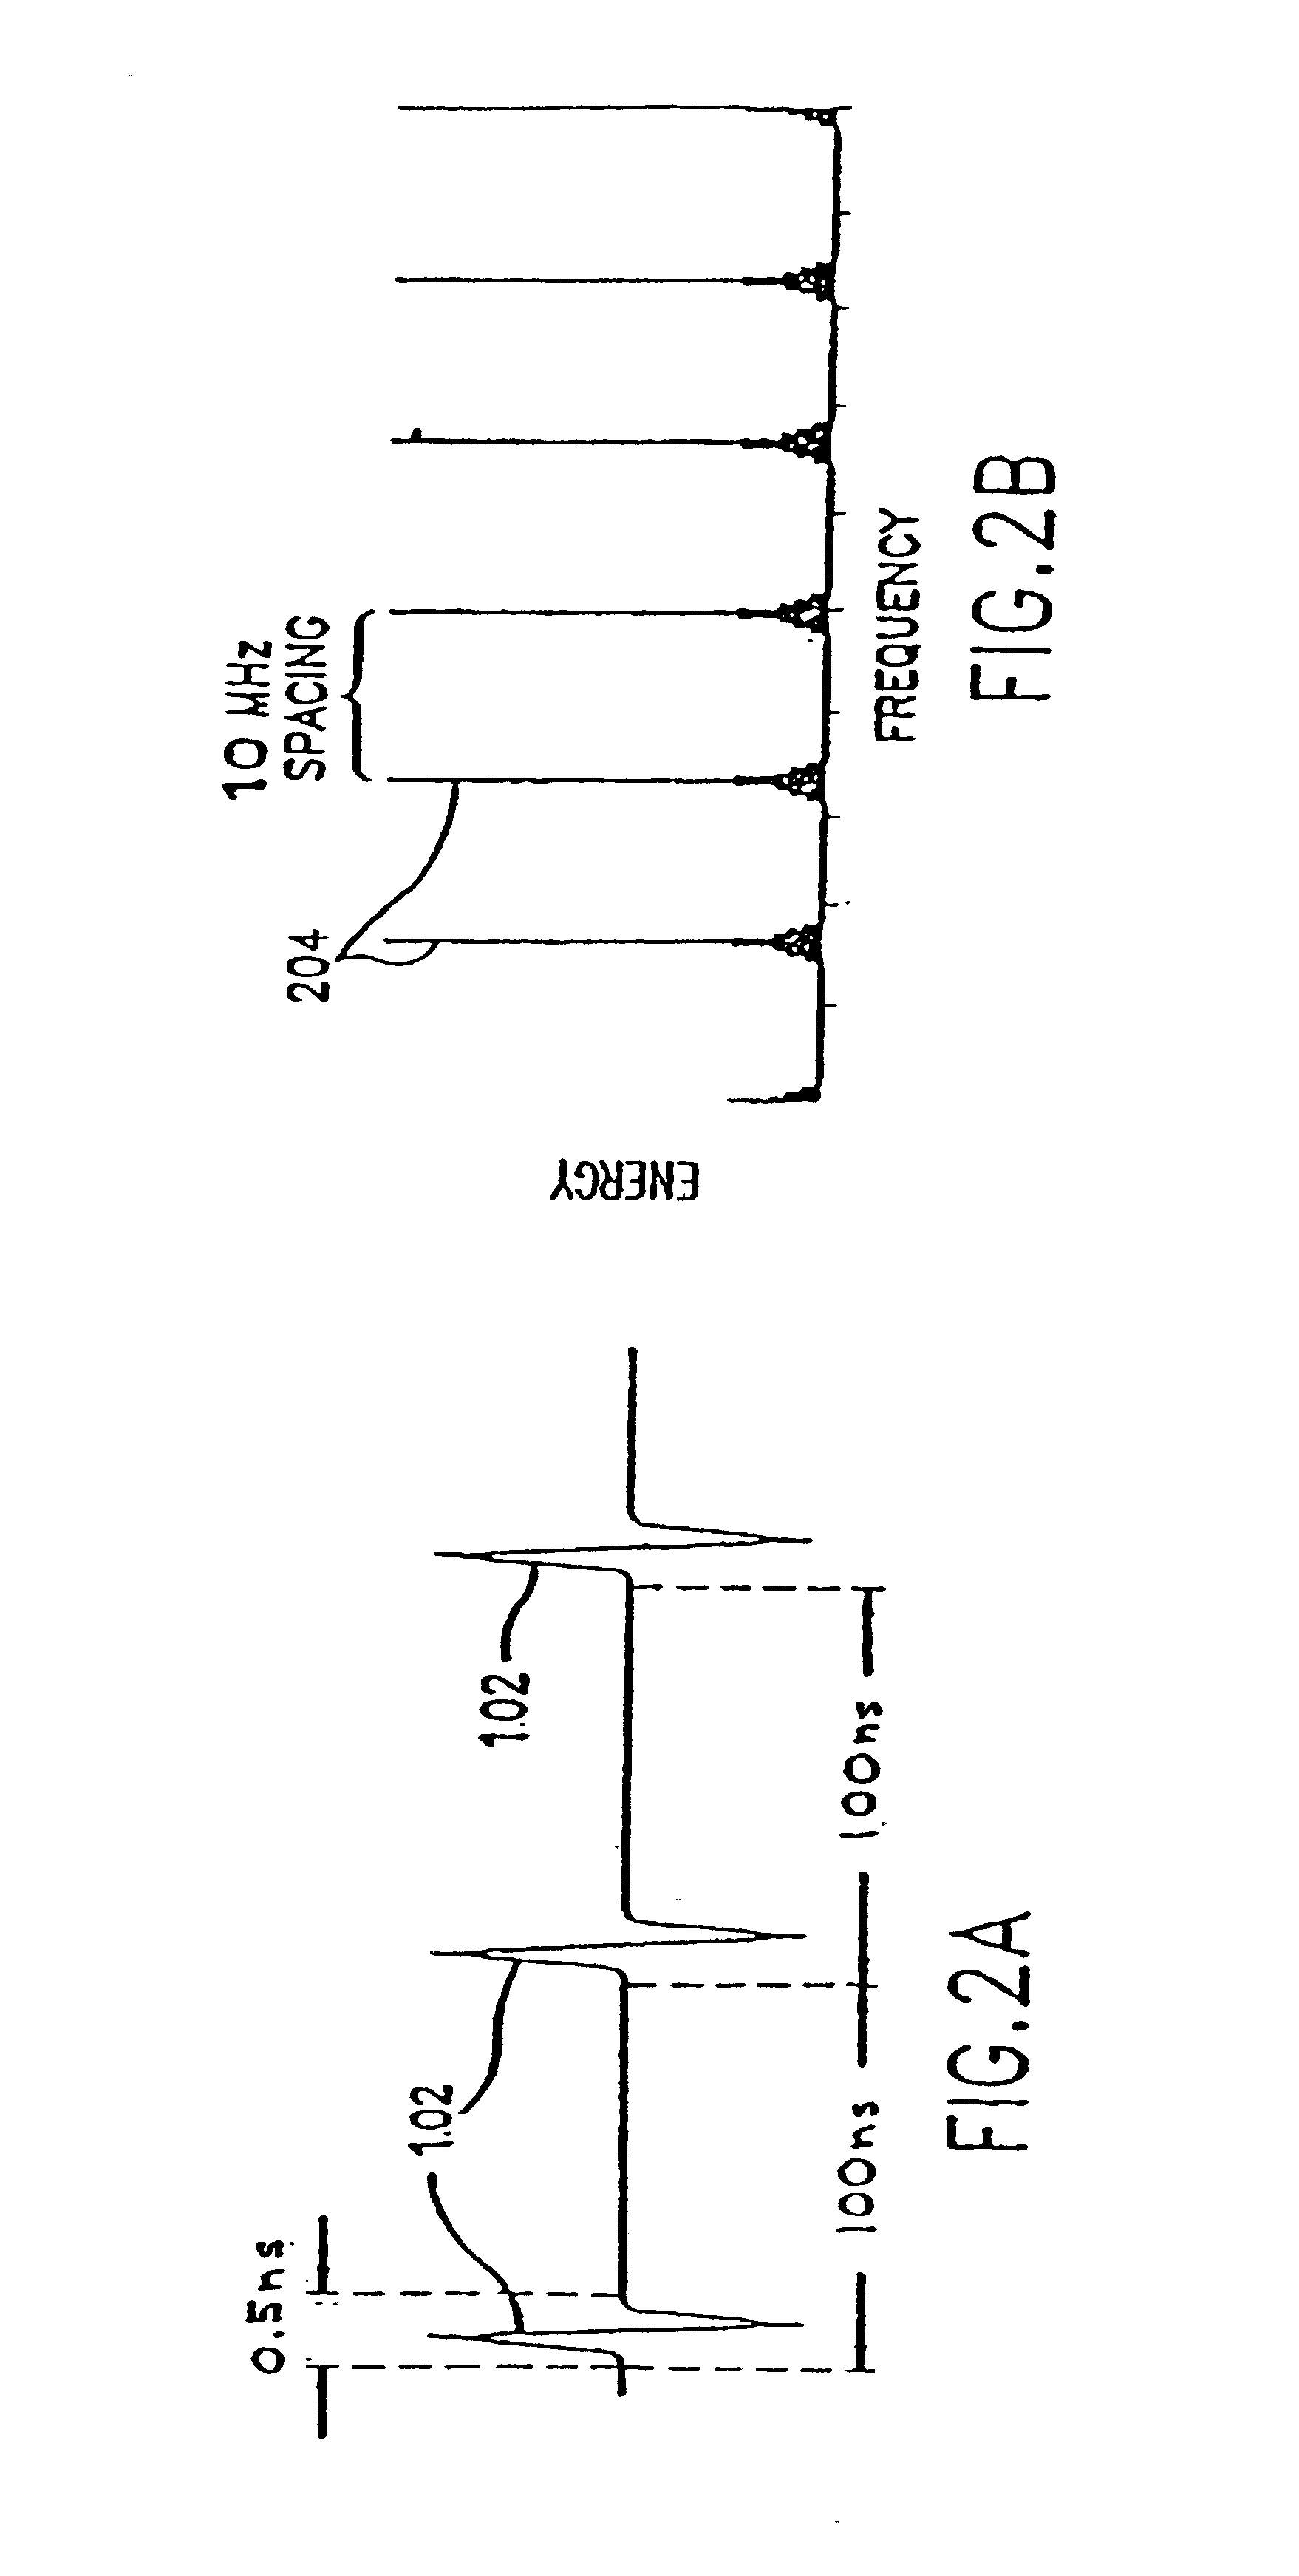 Method for mitigating effects of interference in impulse radio communication